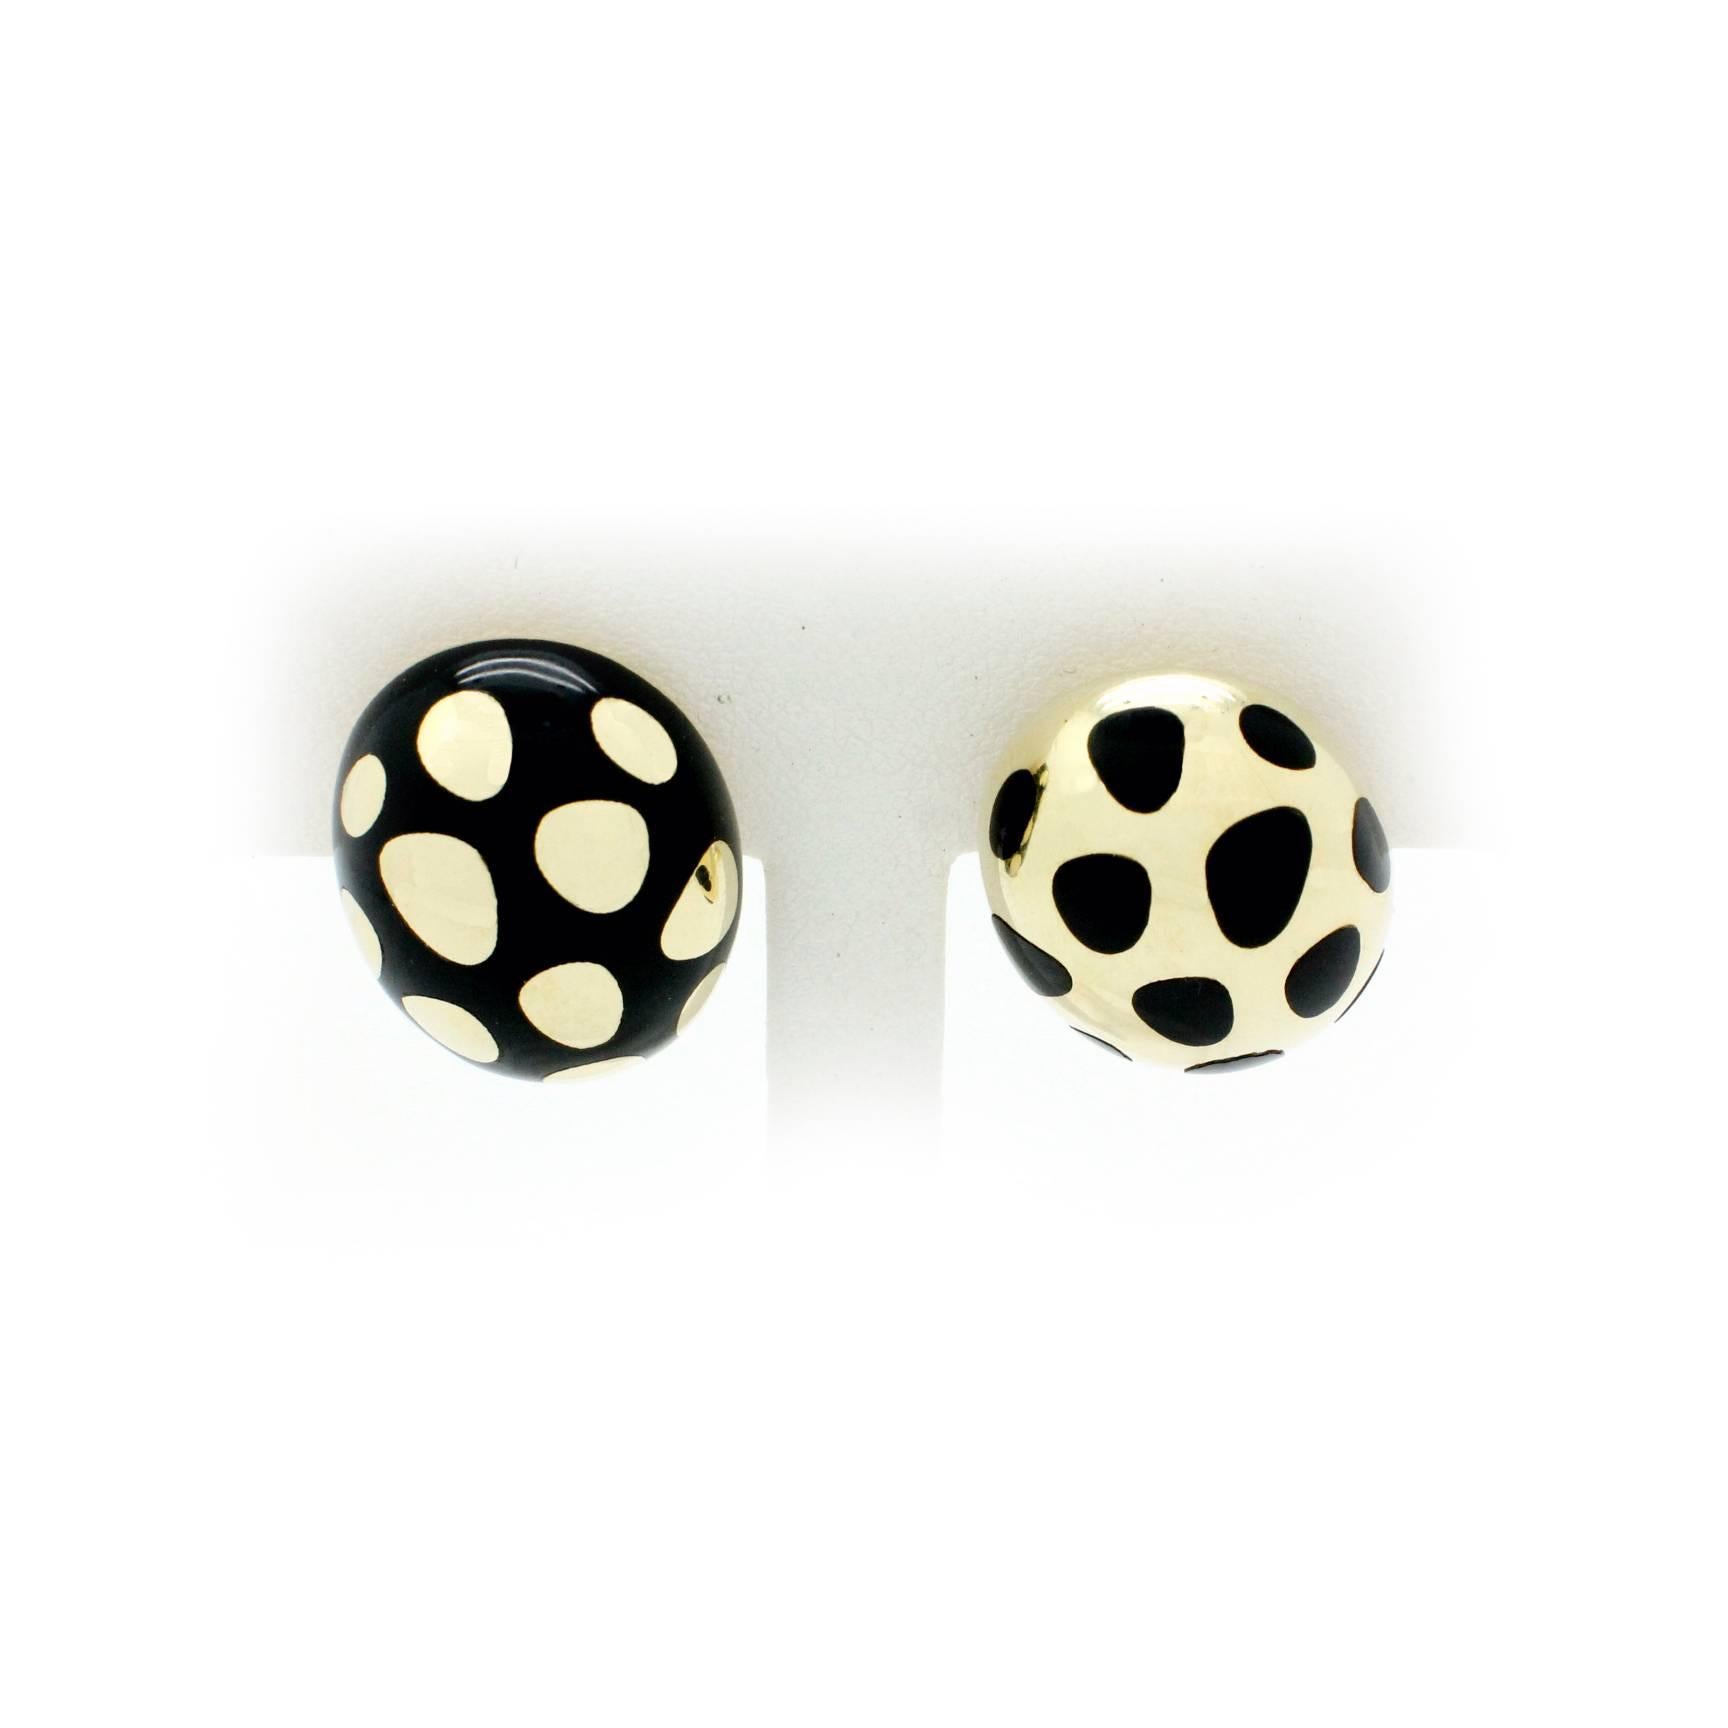 18k Yellow Gold Black Jade Polka Dot Earrings by Tiffany & Co.  These earrings are for pierced ears.  Details:  Weight: 18.7 grams Measurements: 24mm x 18mm Stamped Hallmarks: Tiffany & Co. 750 

These gorgeous vintage 1980's earrings are in